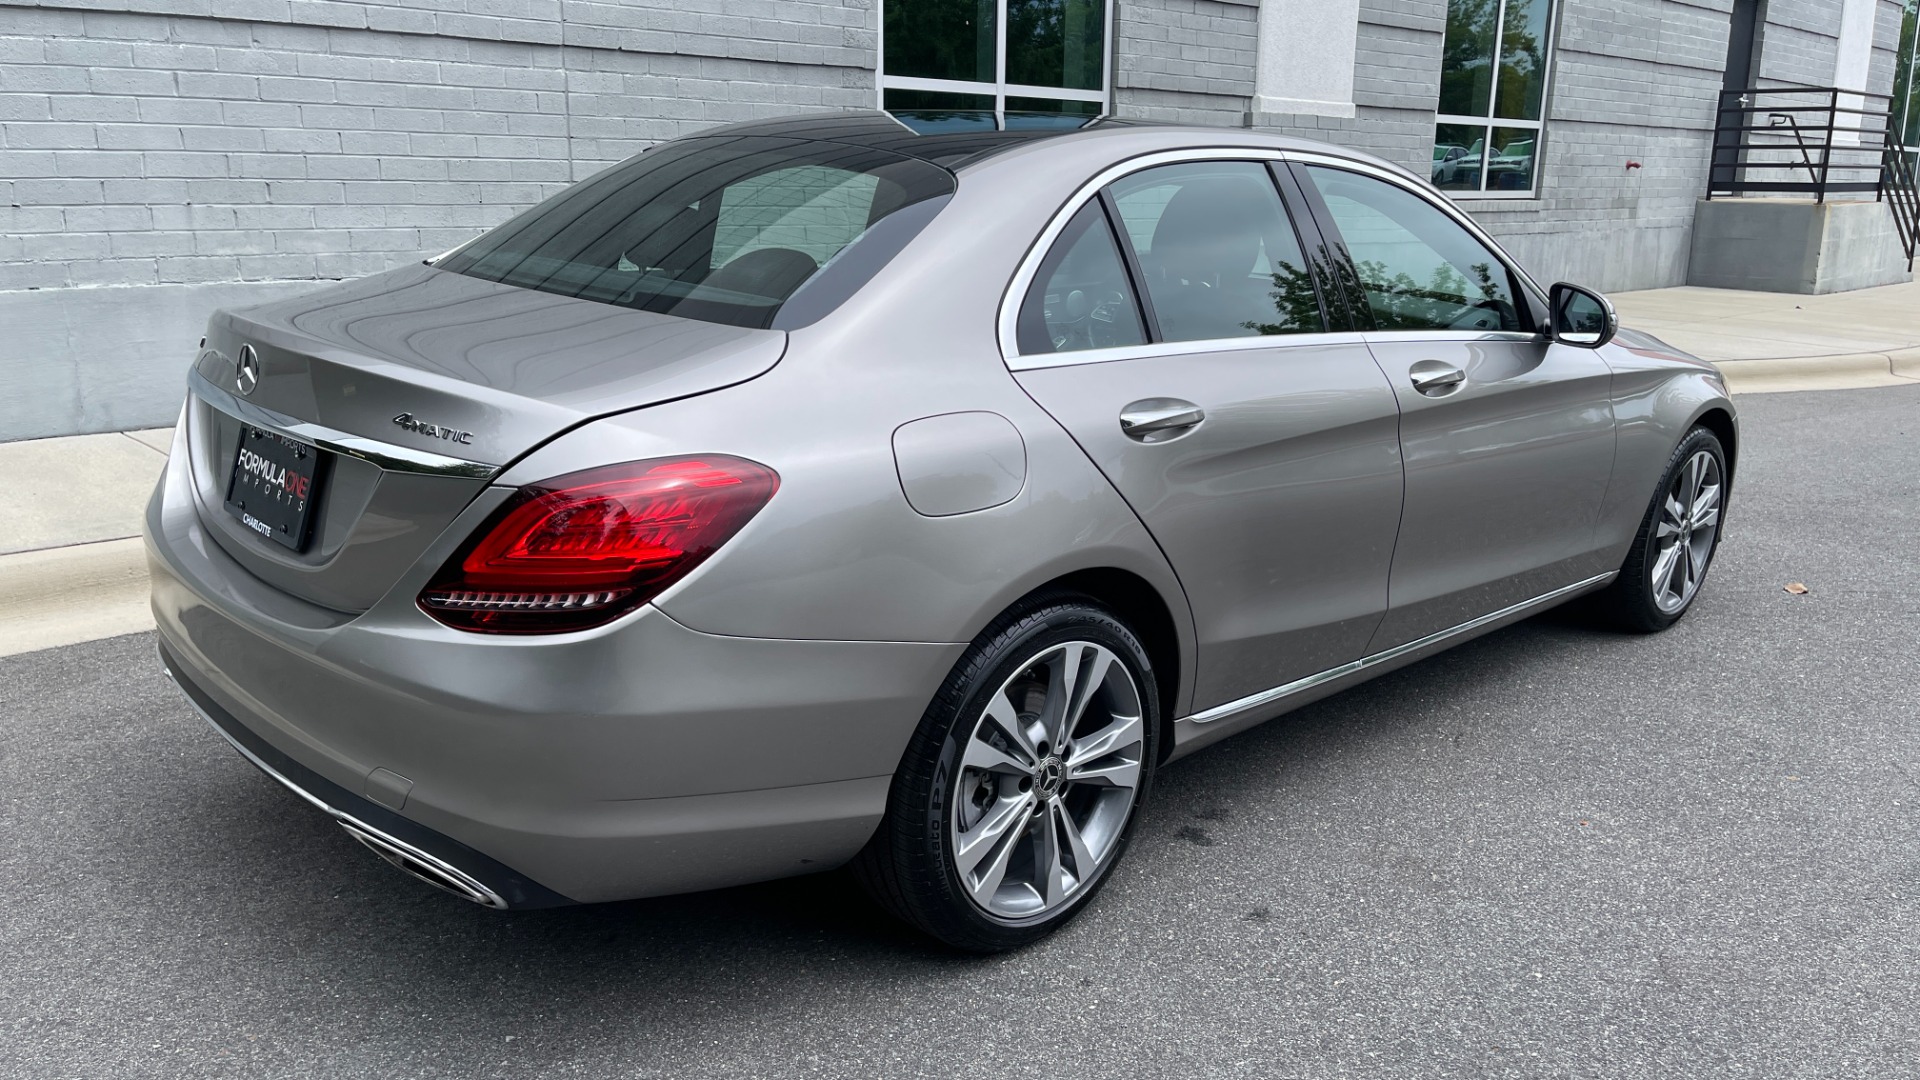 Used 2019 Mercedes-Benz C-Class C 300 / BURMESTER SOUND / PANORAMIC ROOF / WIRELESS CHARING for sale $33,995 at Formula Imports in Charlotte NC 28227 4